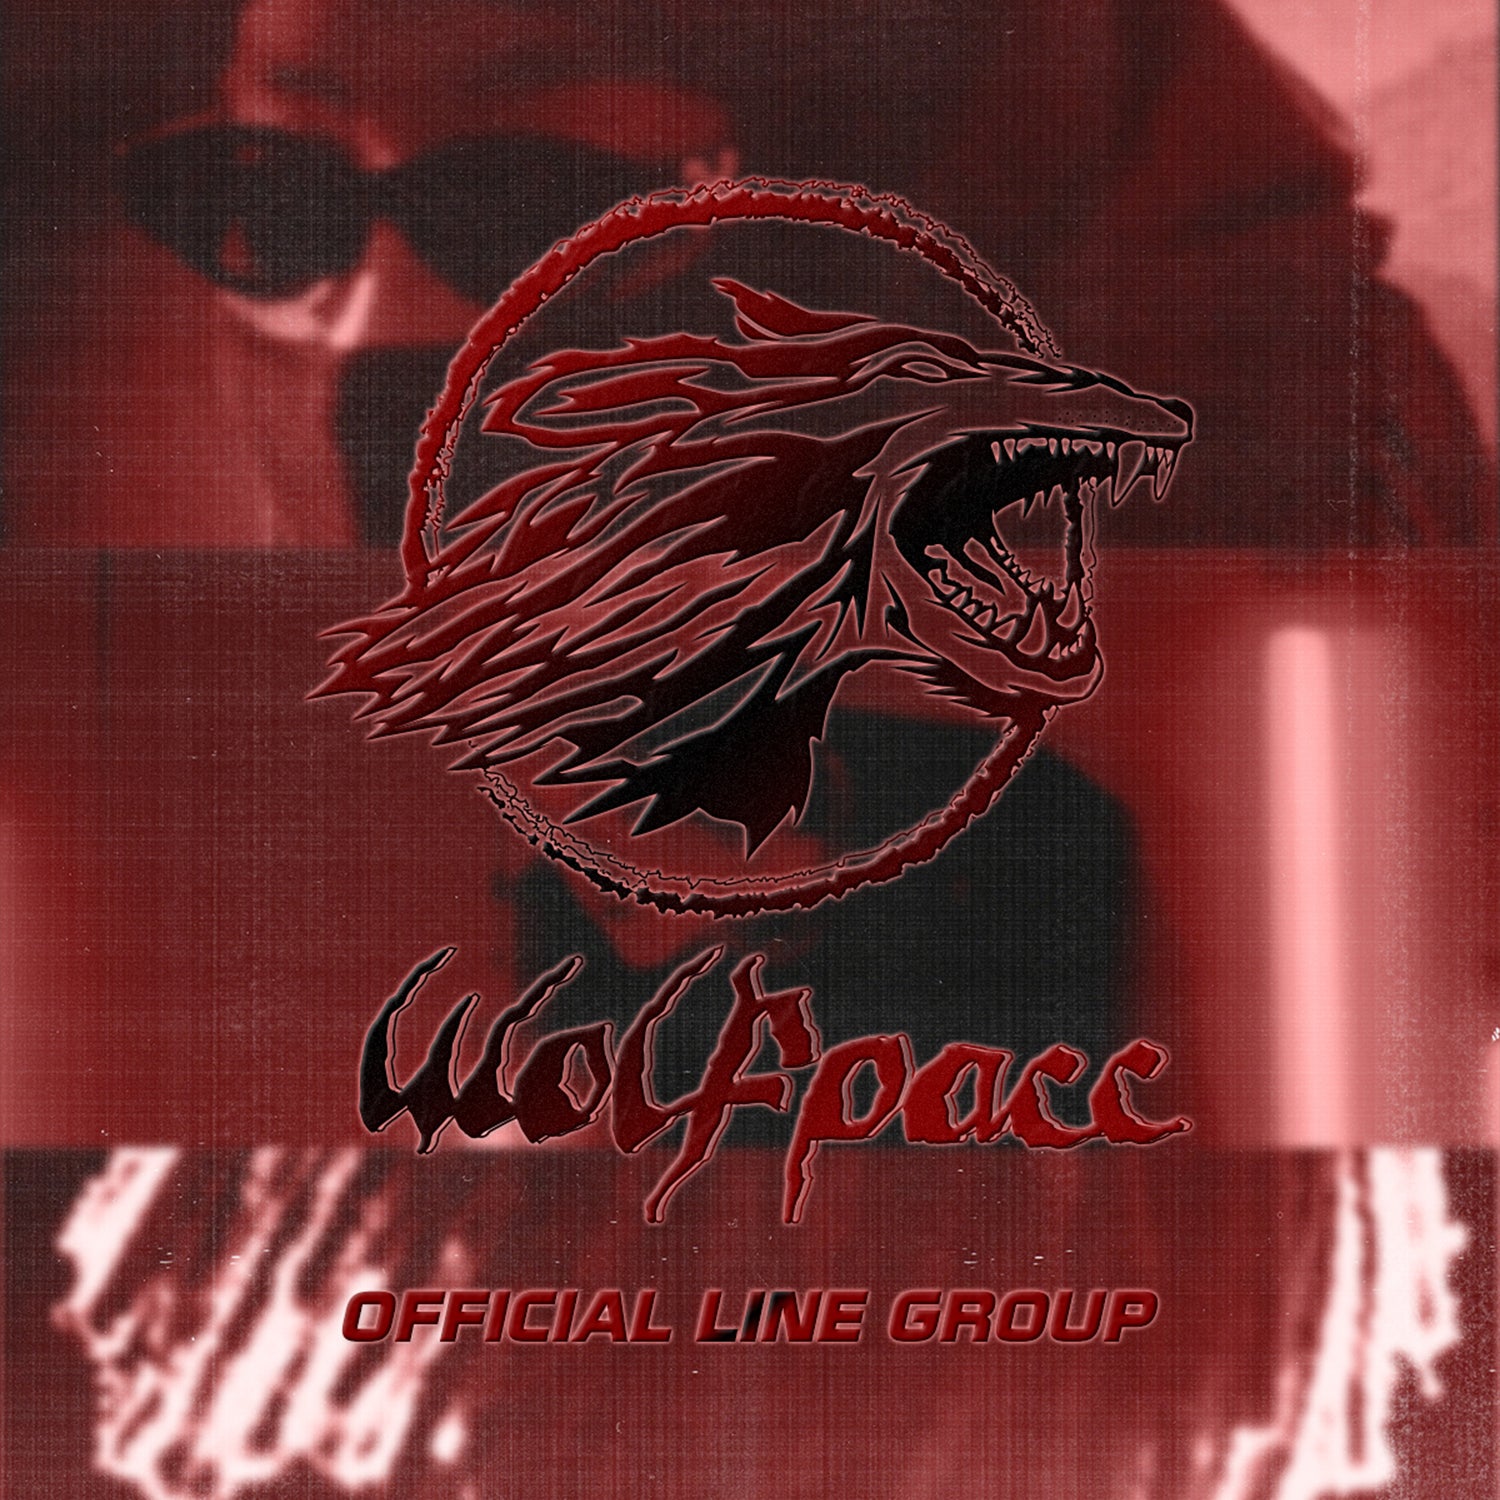 Wolf Pacc "Official Line Group" 正式啟動